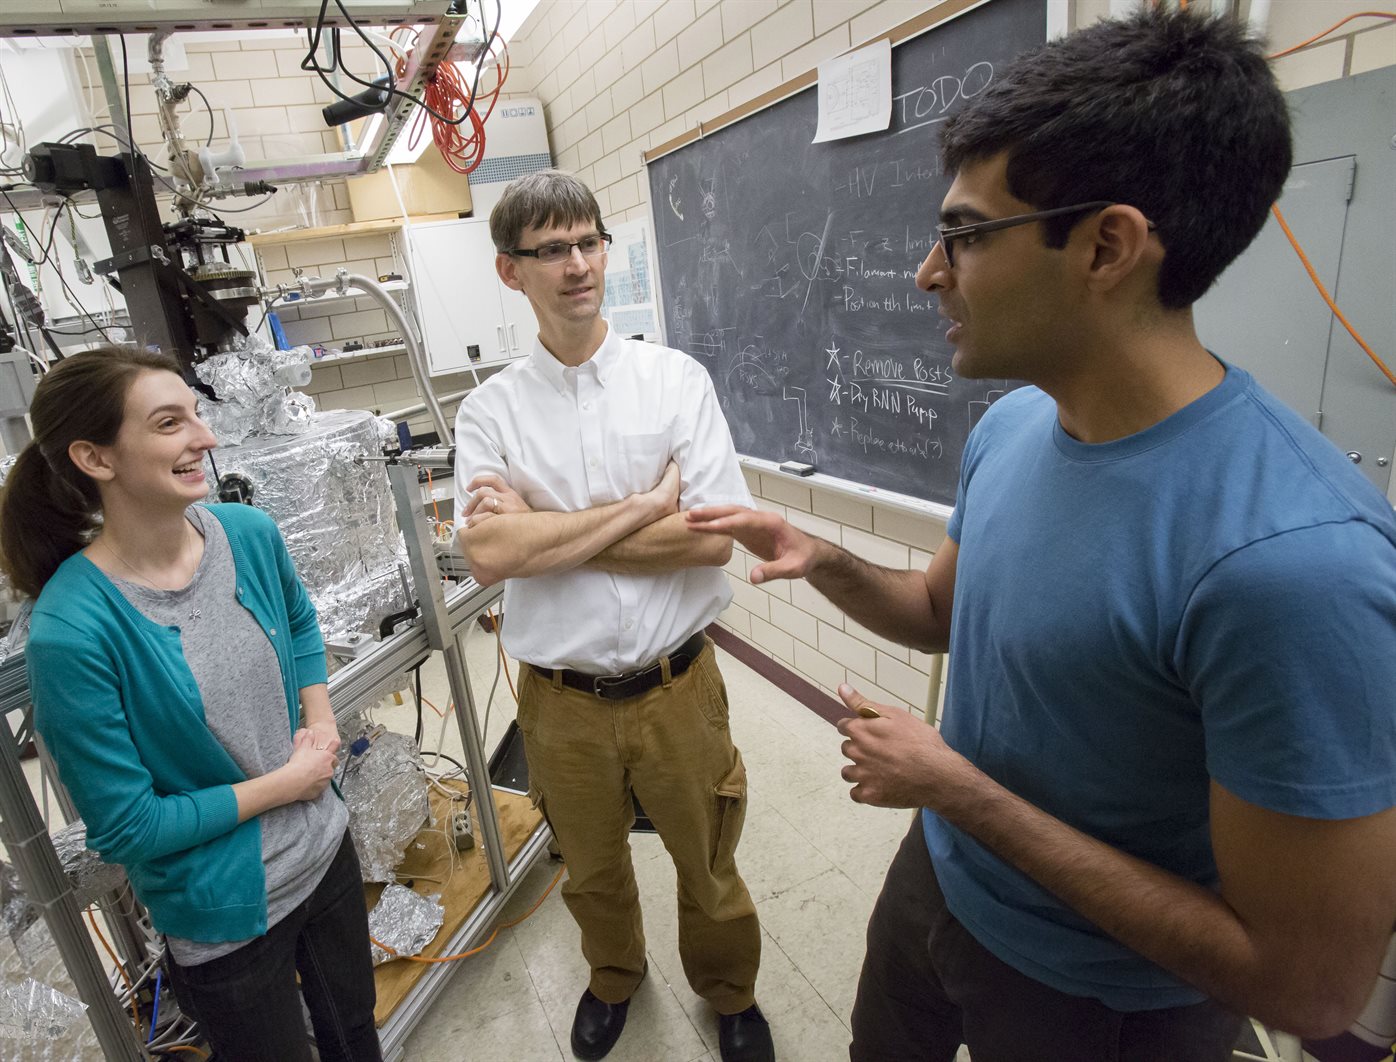 Illinois Physics Professor Peter Abbamonte (center) works with graduate students Mindy Rak (left) and Anshul Kogar in his lab at the Frederick Seitz Materials Research Laboratory. Photo by L. Brian Stauffer